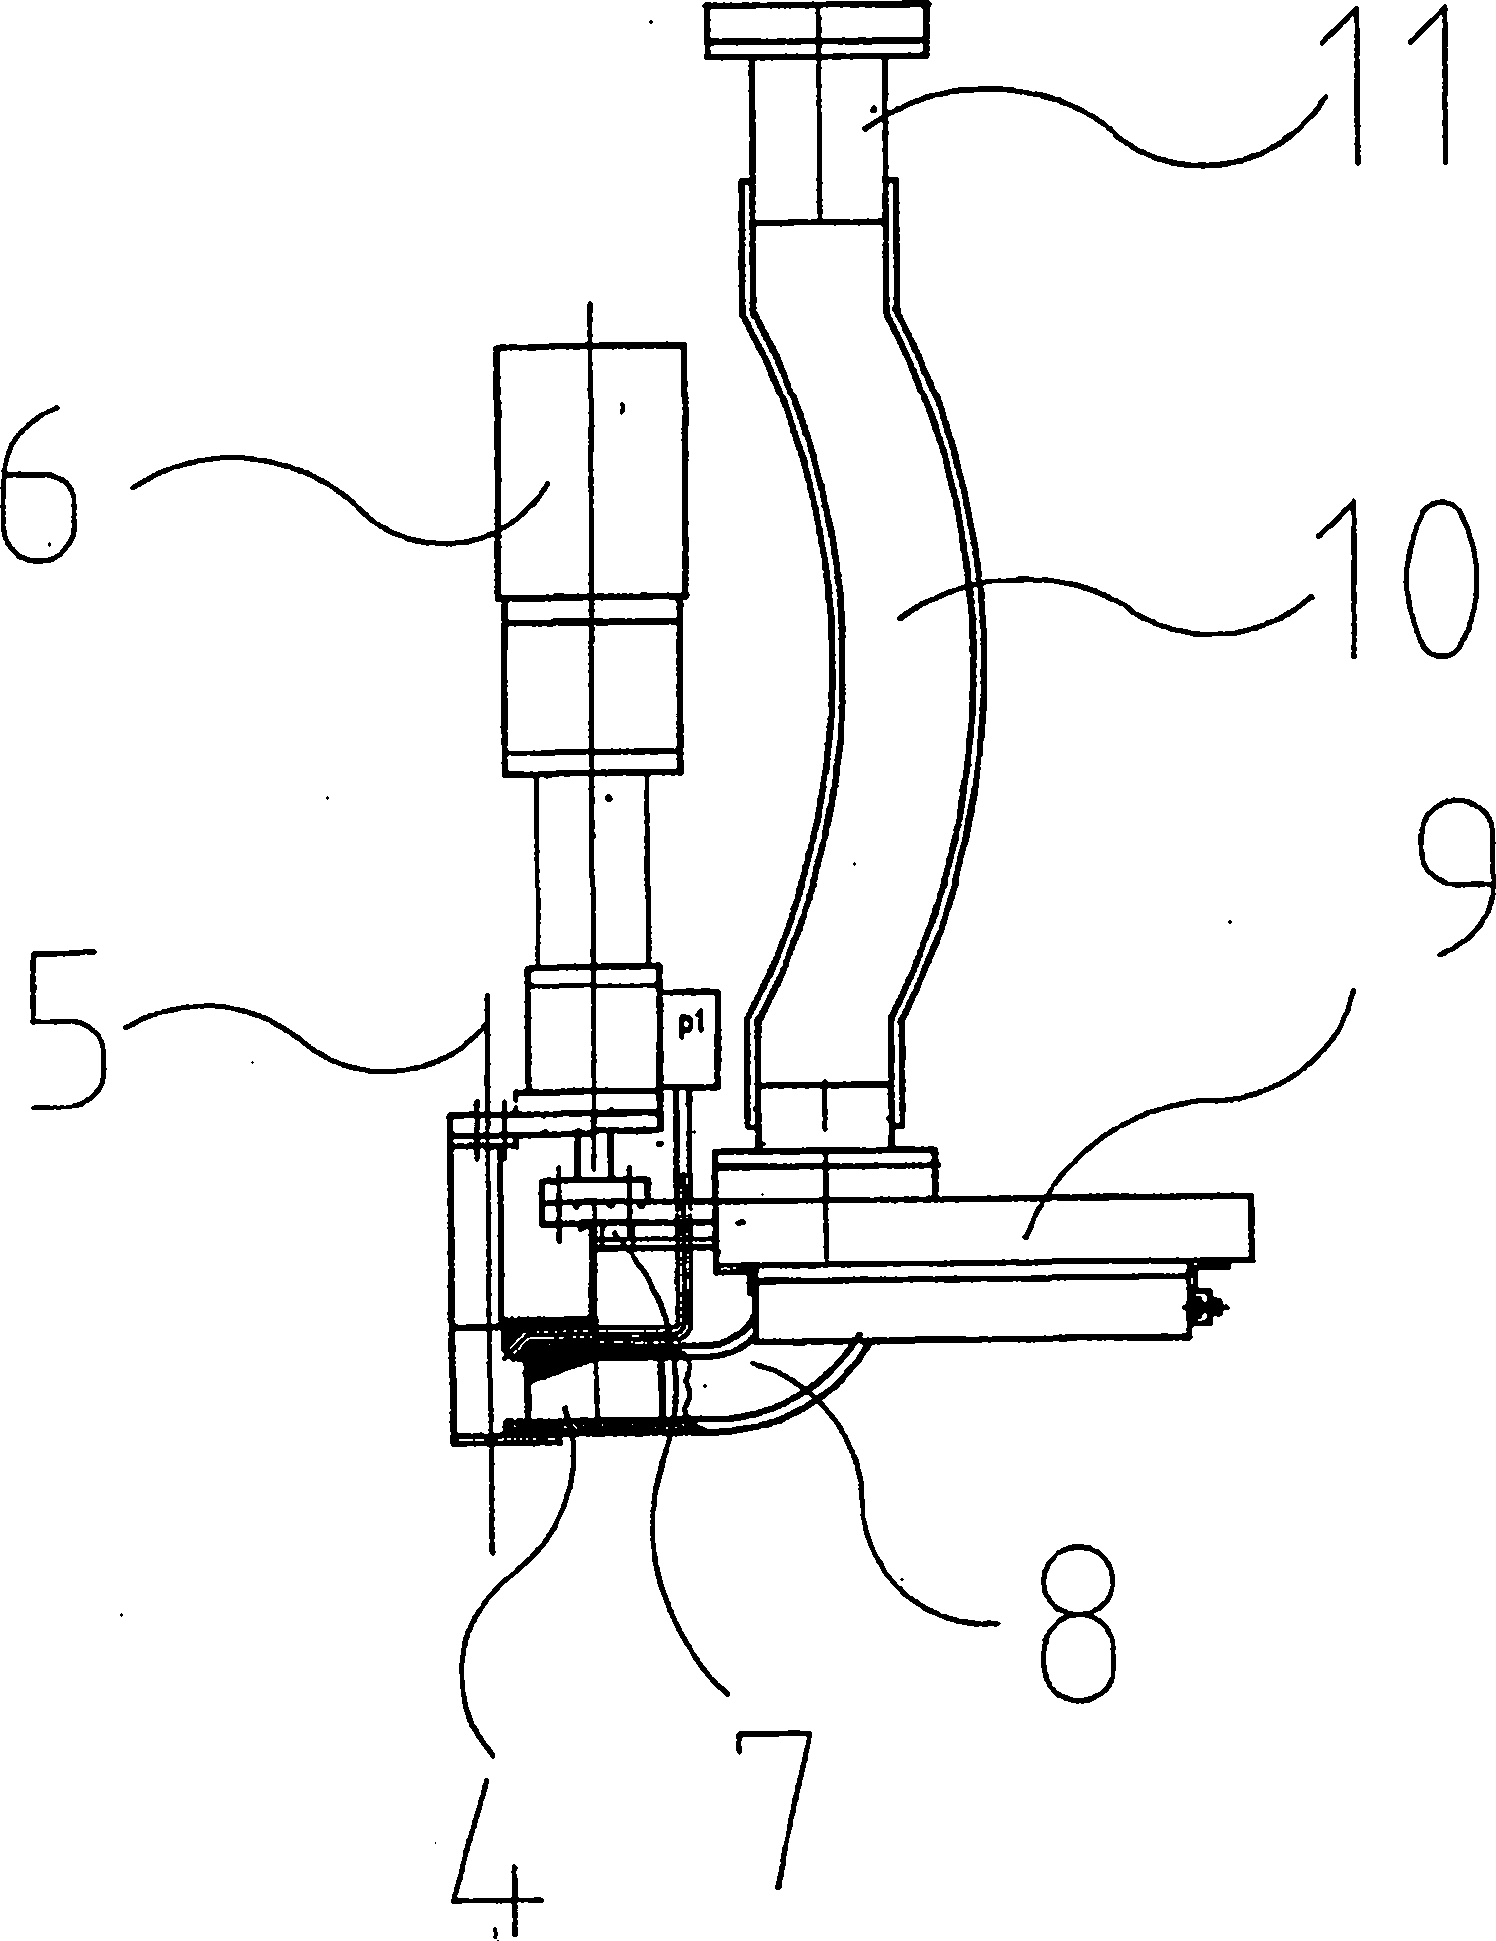 Device for producing moulded pieces from fibrous material